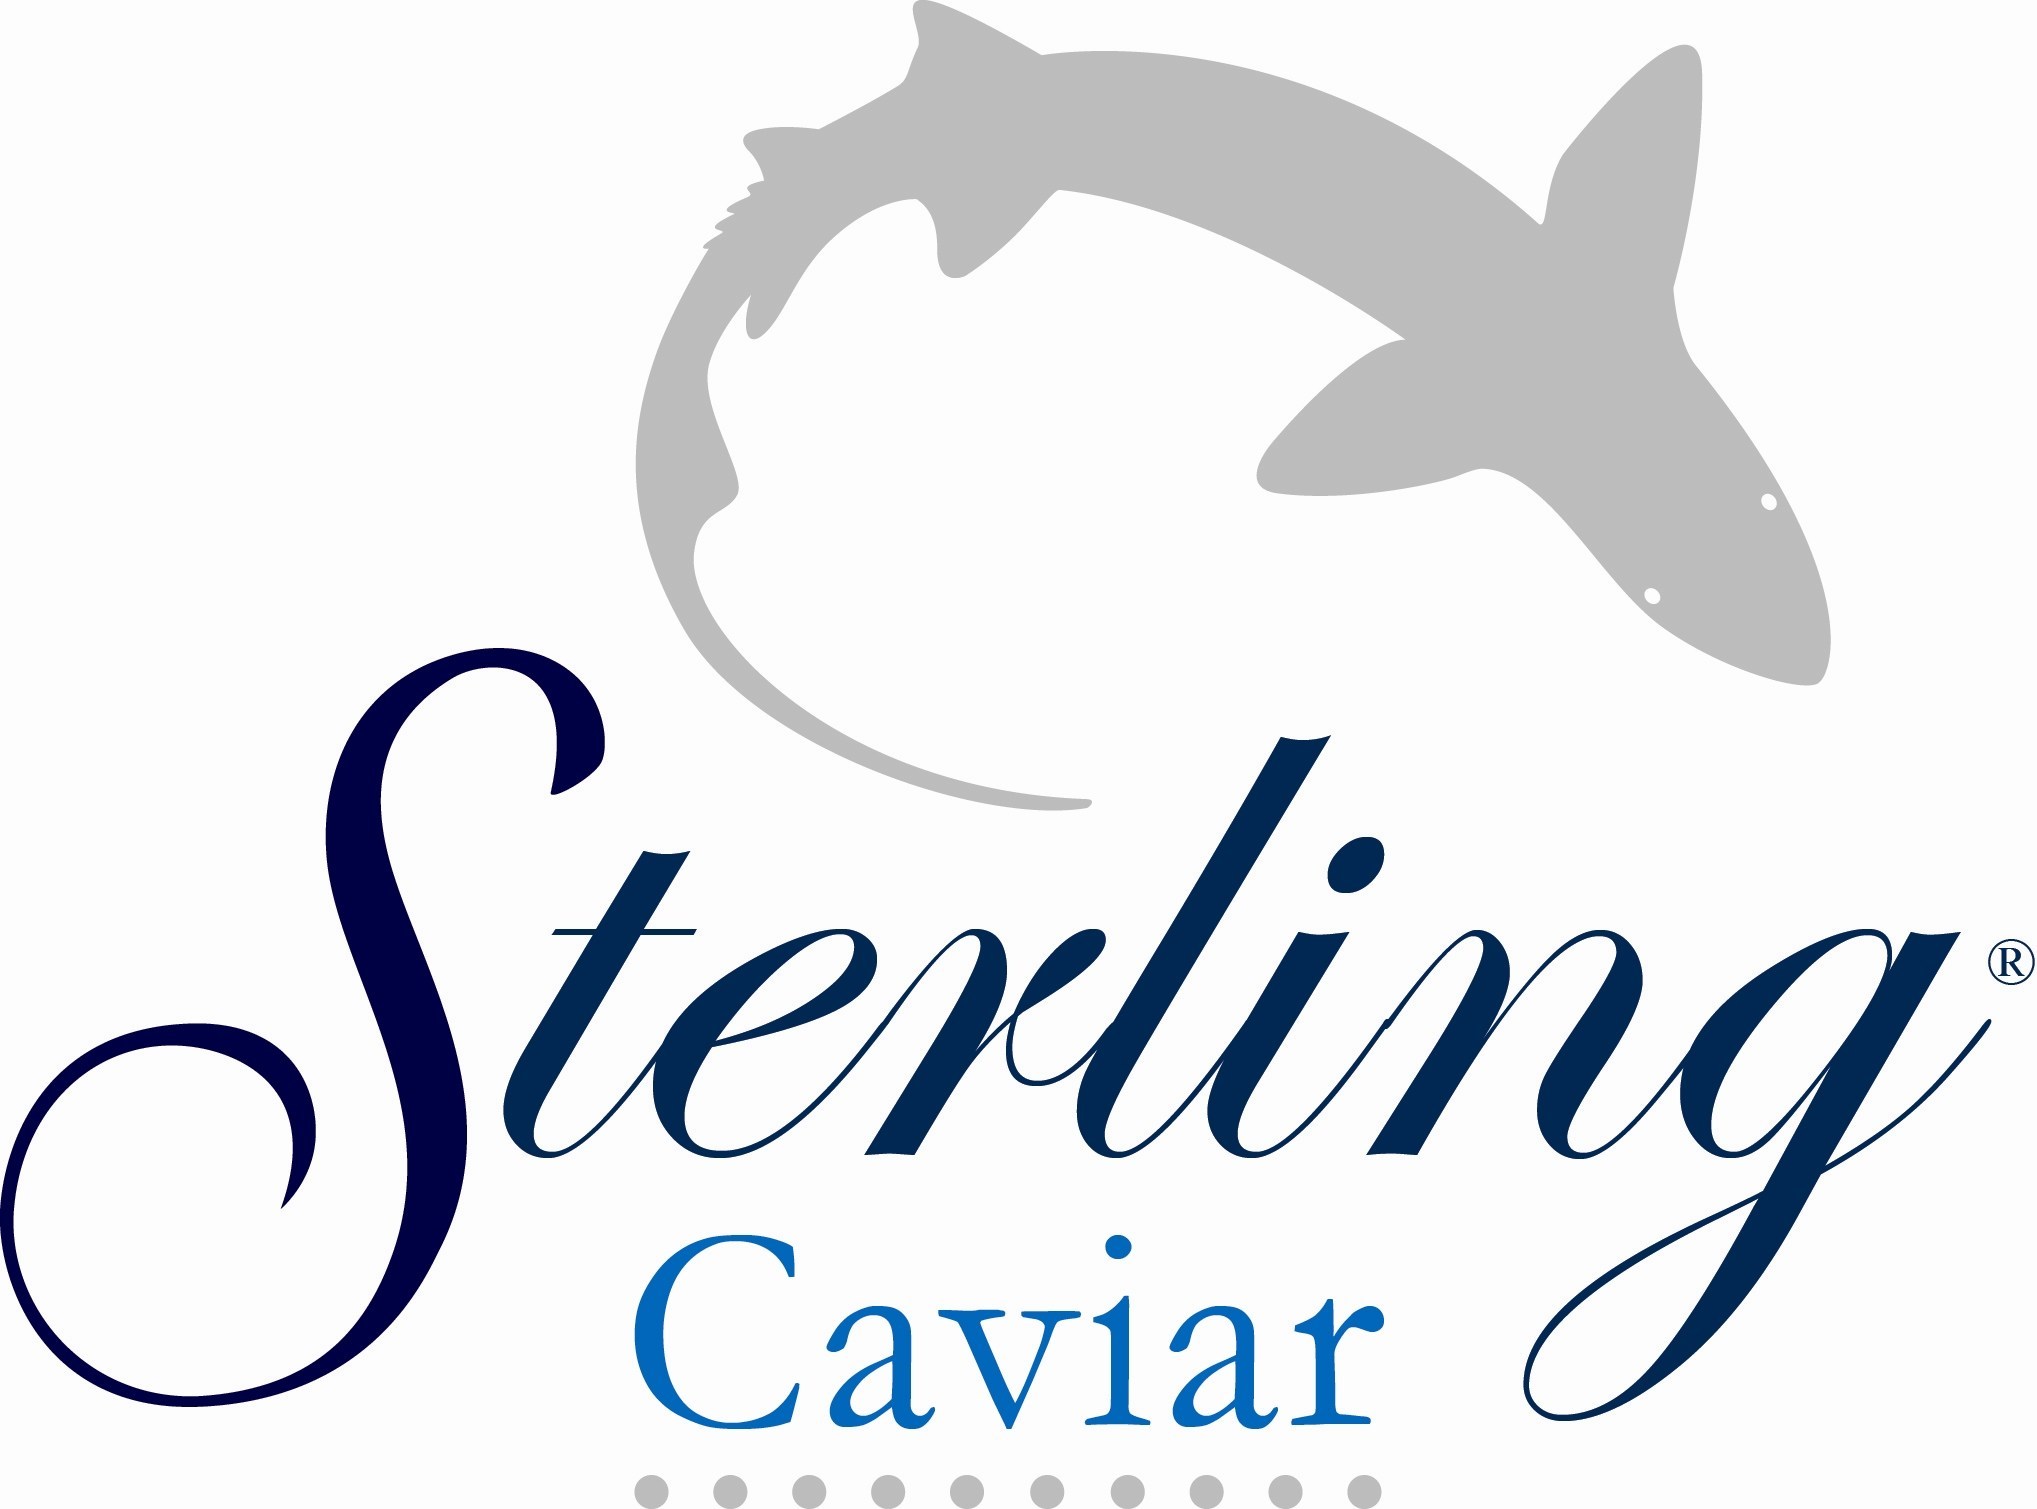 Sterling Caviar Nets Seafood Gold Award and Product of the Year at sofi Awards